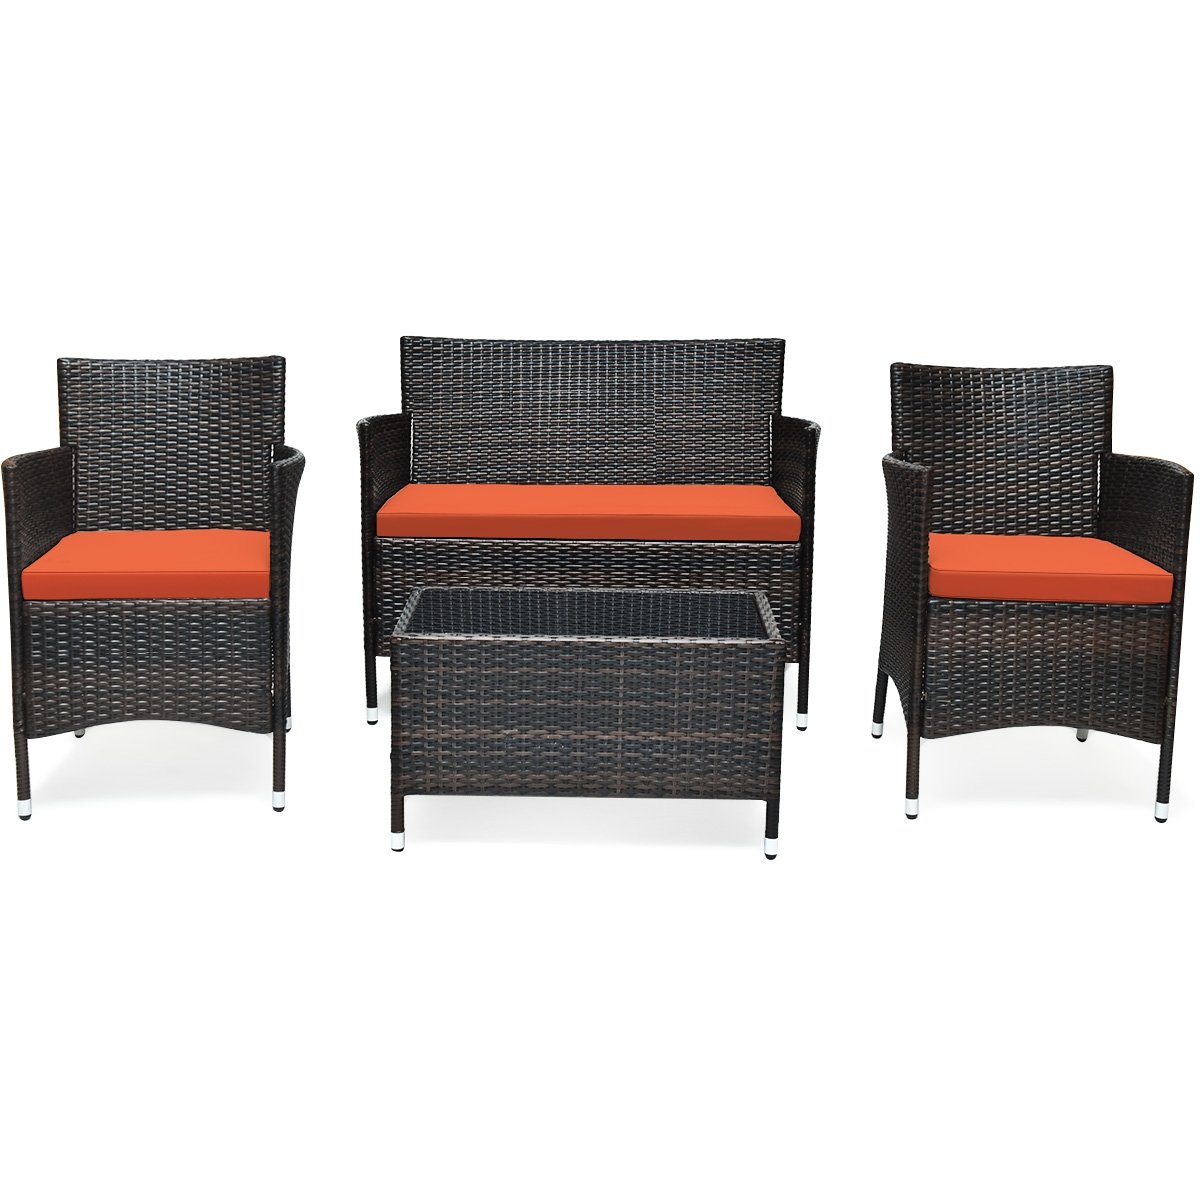 4 Pieces Comfortable Outdoor Rattan Sofa Set with Glass Coffee Table, Orange